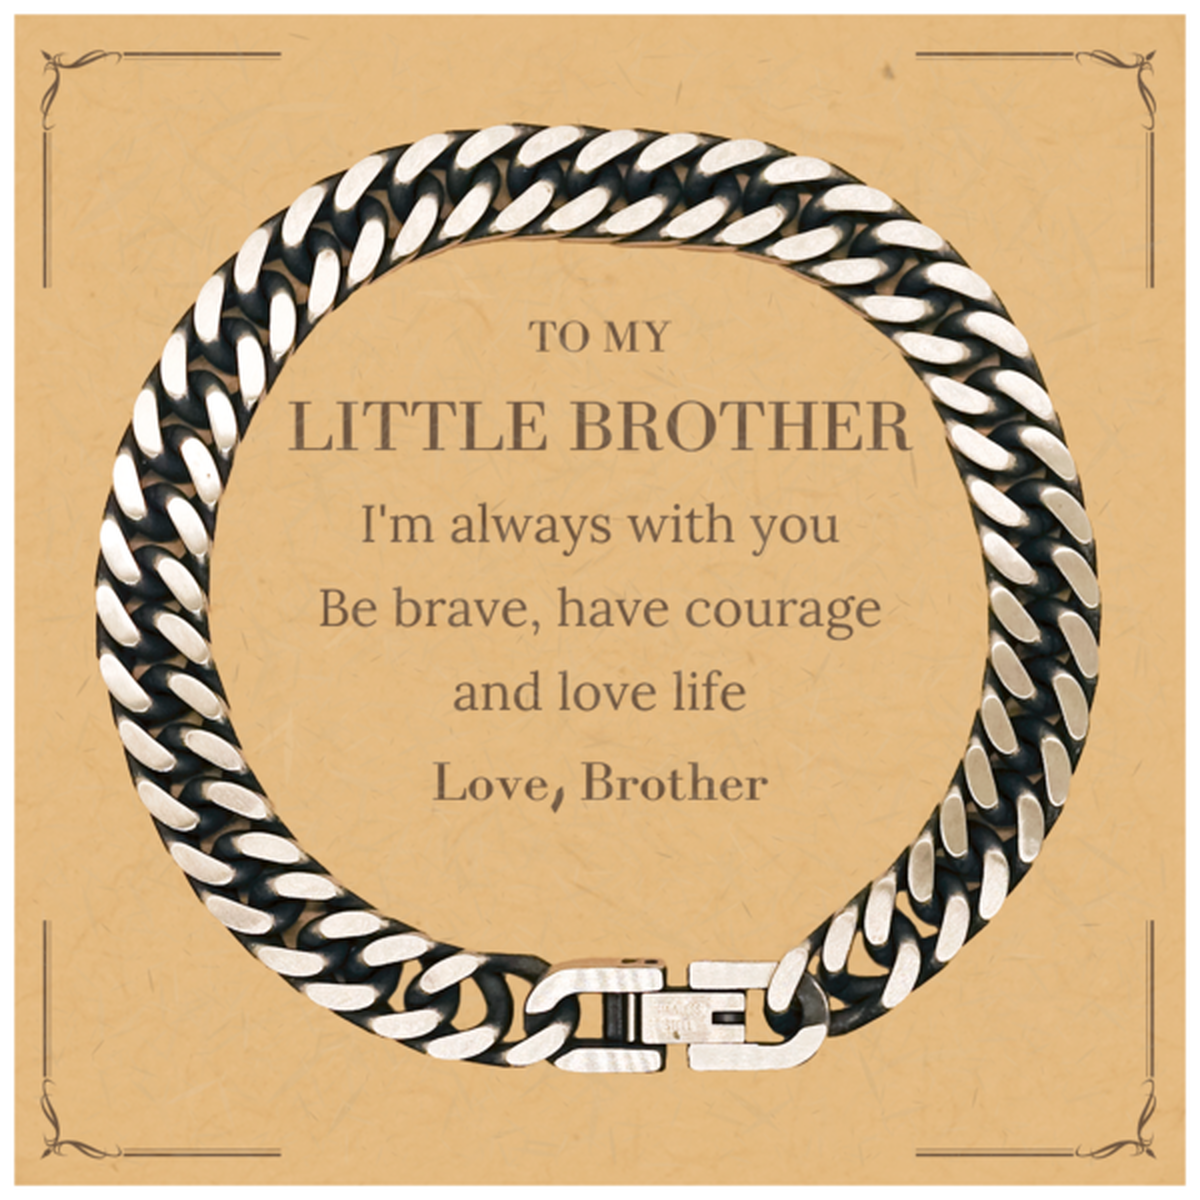 To My Little Brother Gifts from Brother, Unique Cuban Link Chain Bracelet Inspirational Christmas Birthday Graduation Gifts for Little Brother I'm always with you. Be brave, have courage and love life. Love, Brother